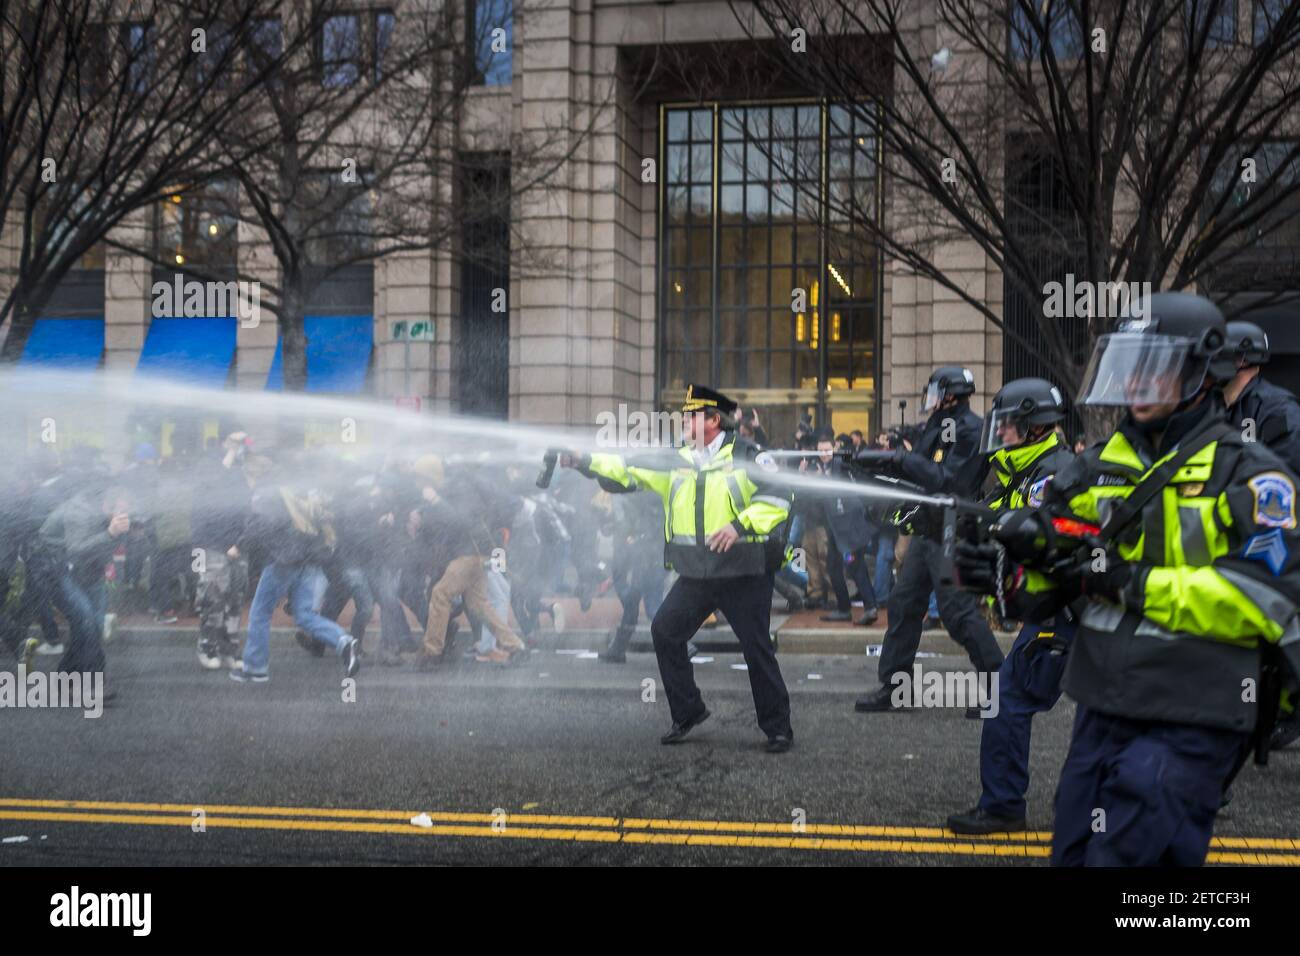 Hours after Donald Trump was swore in as the 45th President of the United States, On January, 20, 2017, ??protesters clashed with riot police, who launched flash grenades and sprayed pepper spray into ?the packed streets. (Photo by Michael Nigro) *** Please Use Credit from Credit Field *** Stock Photo